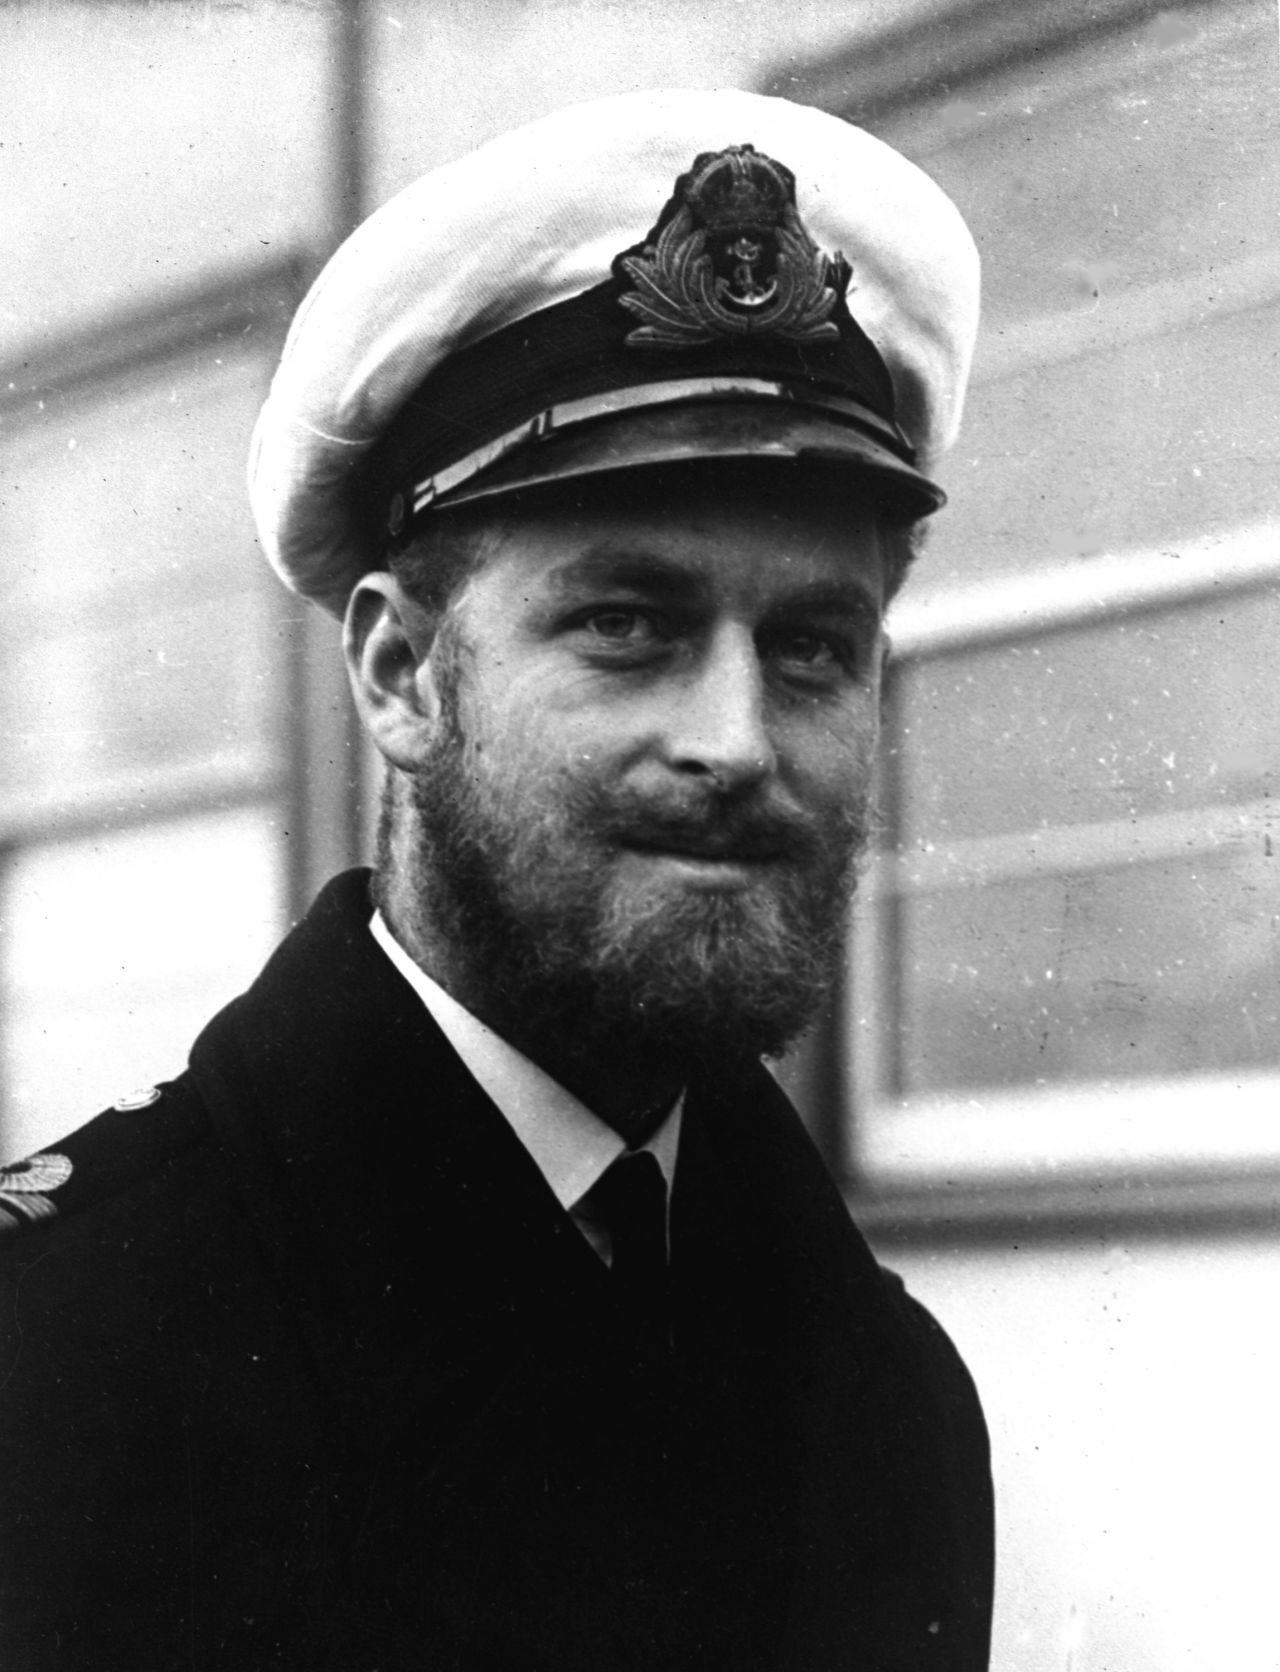 Prince Philip during a naval visit to Melbourne, Australia in 1945.